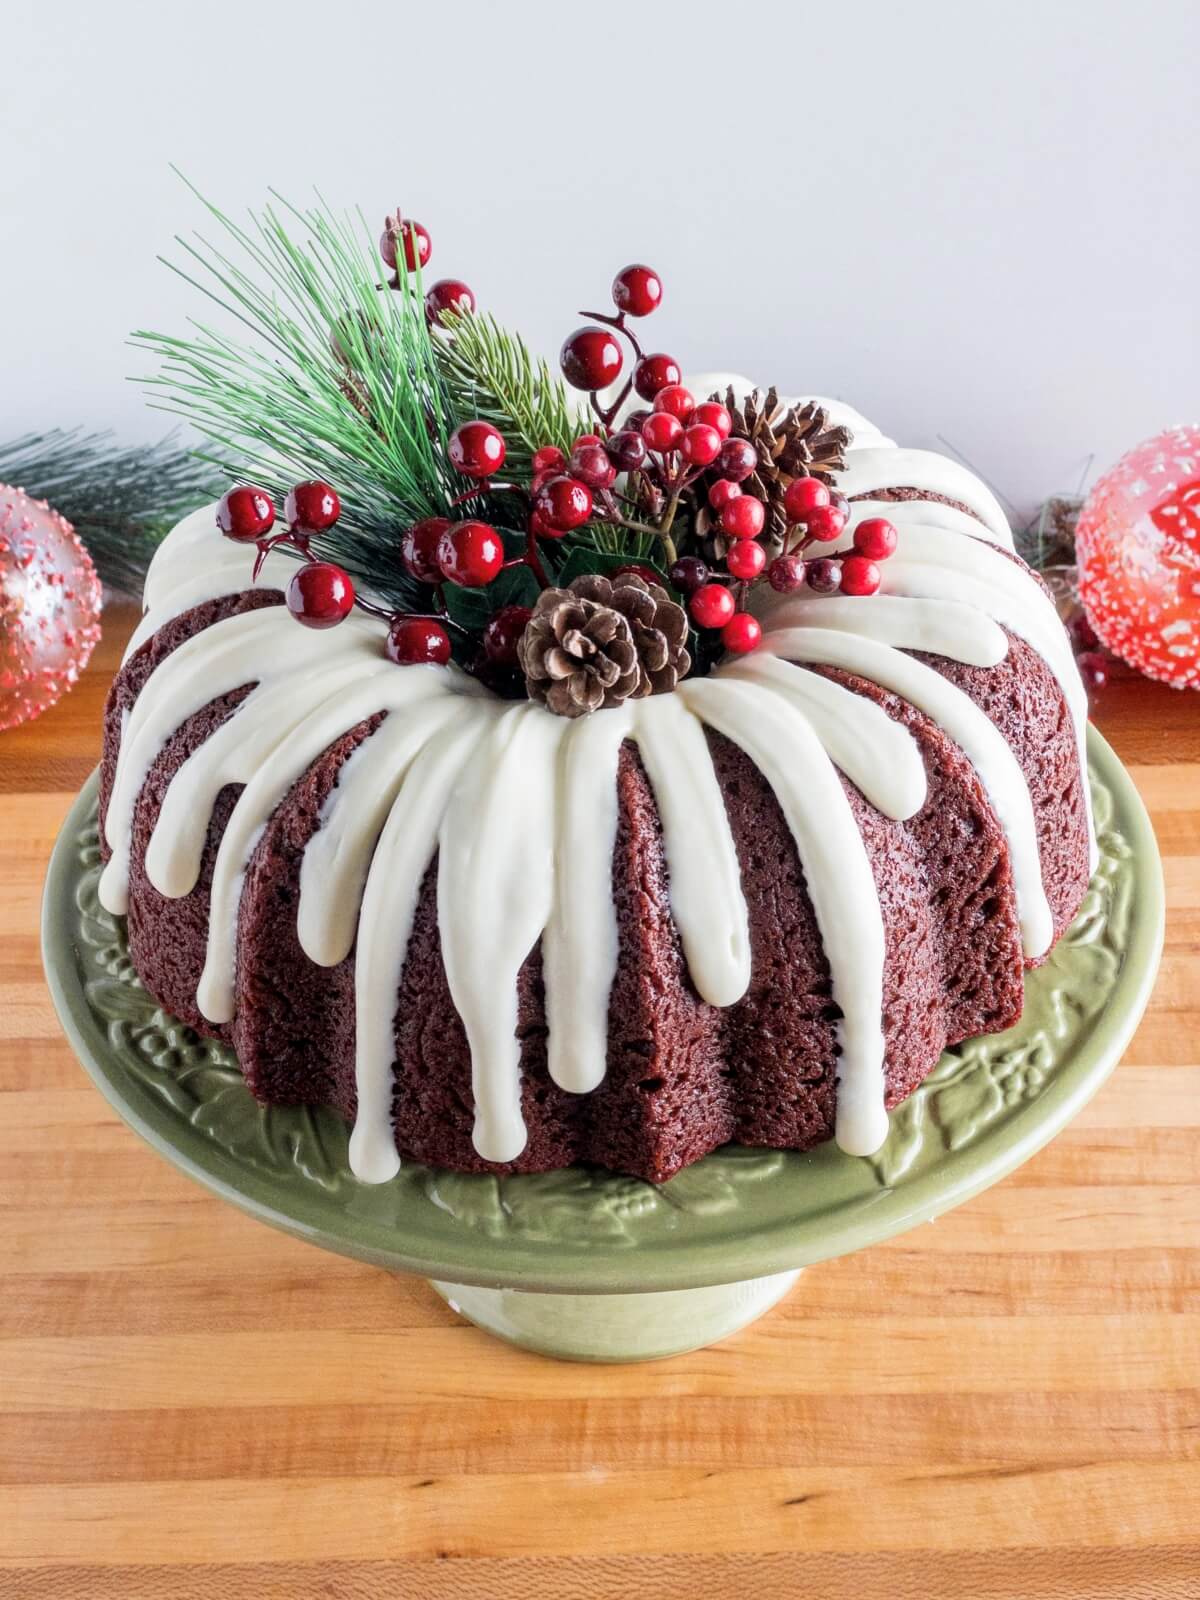 A Christmas Bundt Cake with red velvet cake, cream cheese glaze drizzle, and holly, berries and pine cones decorating the cake